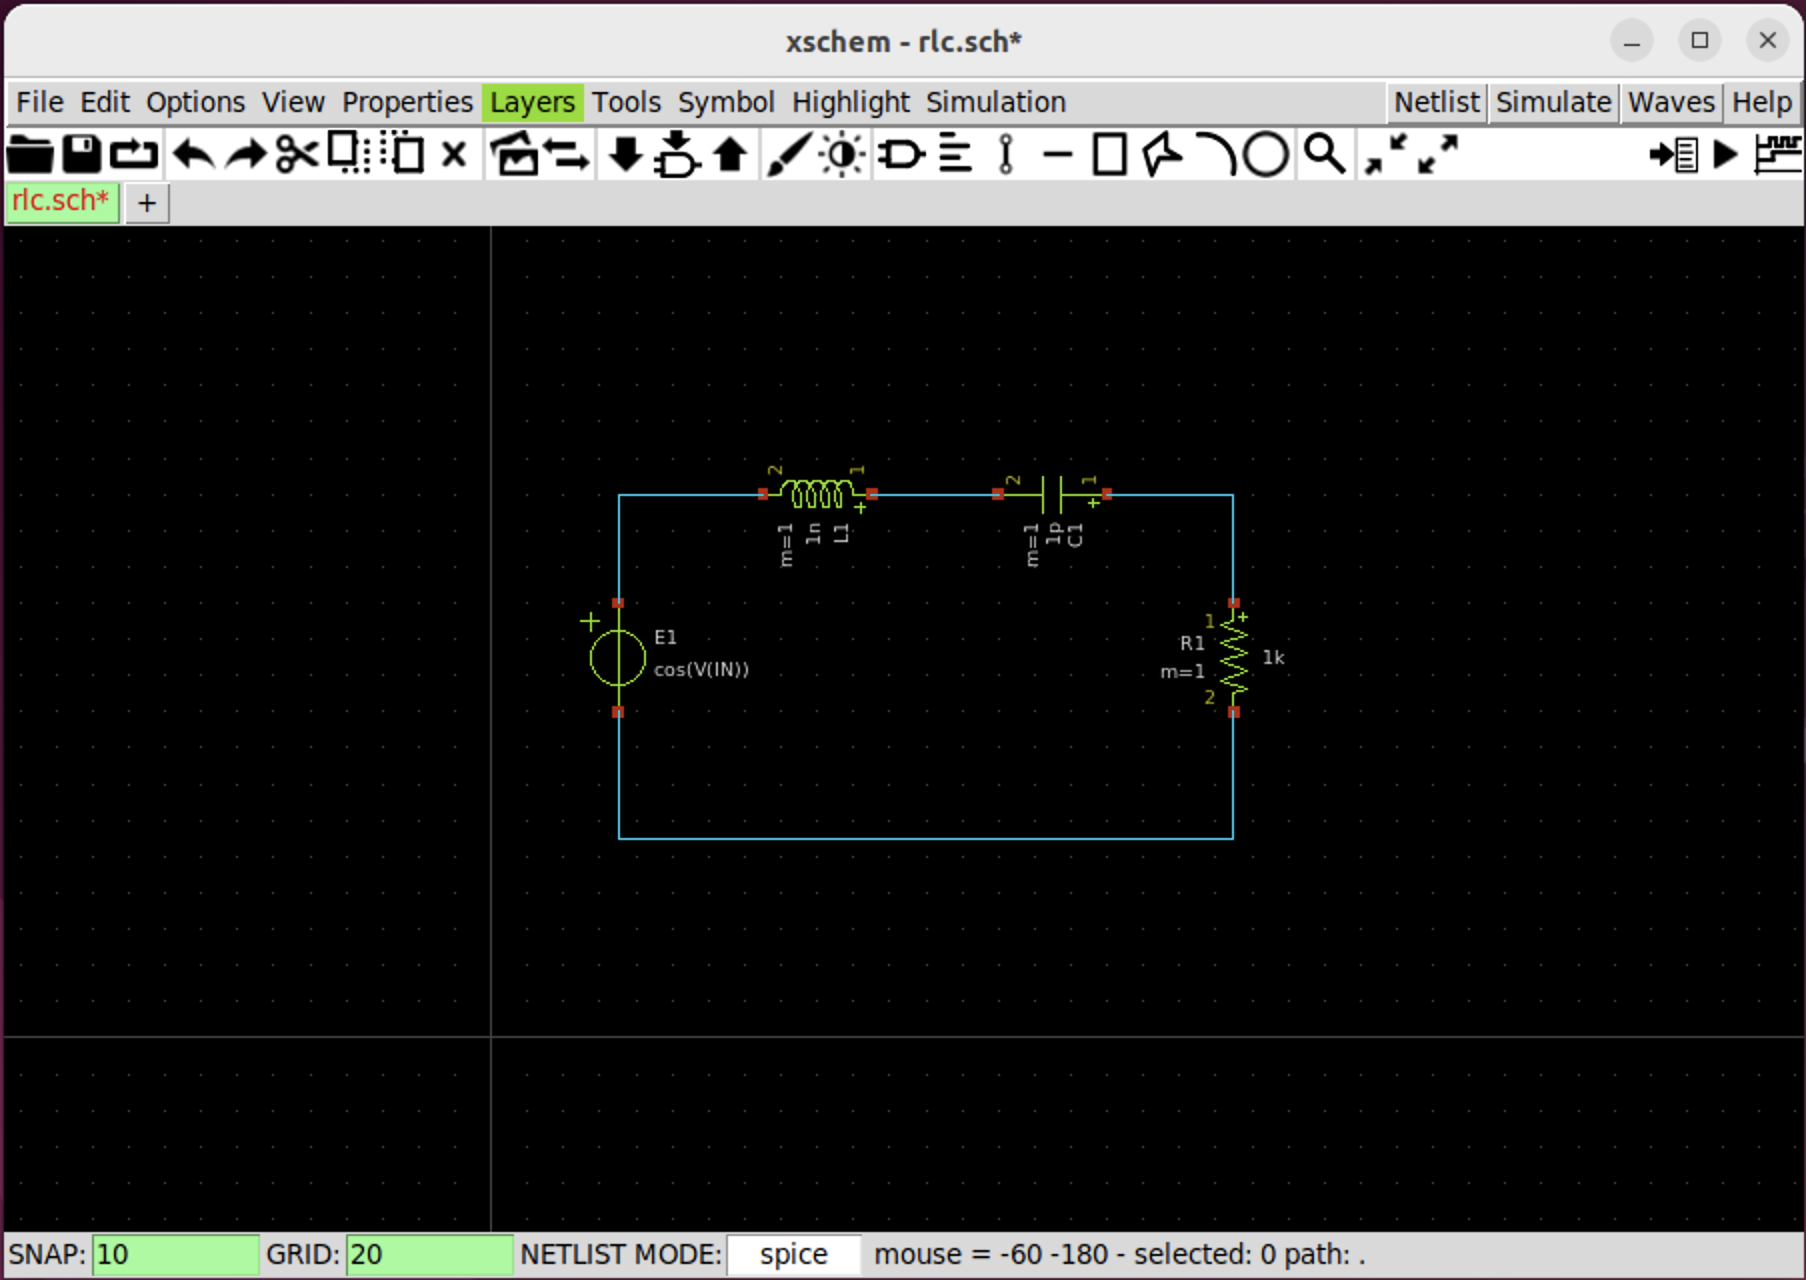 Wiring and re-arranging the schematic